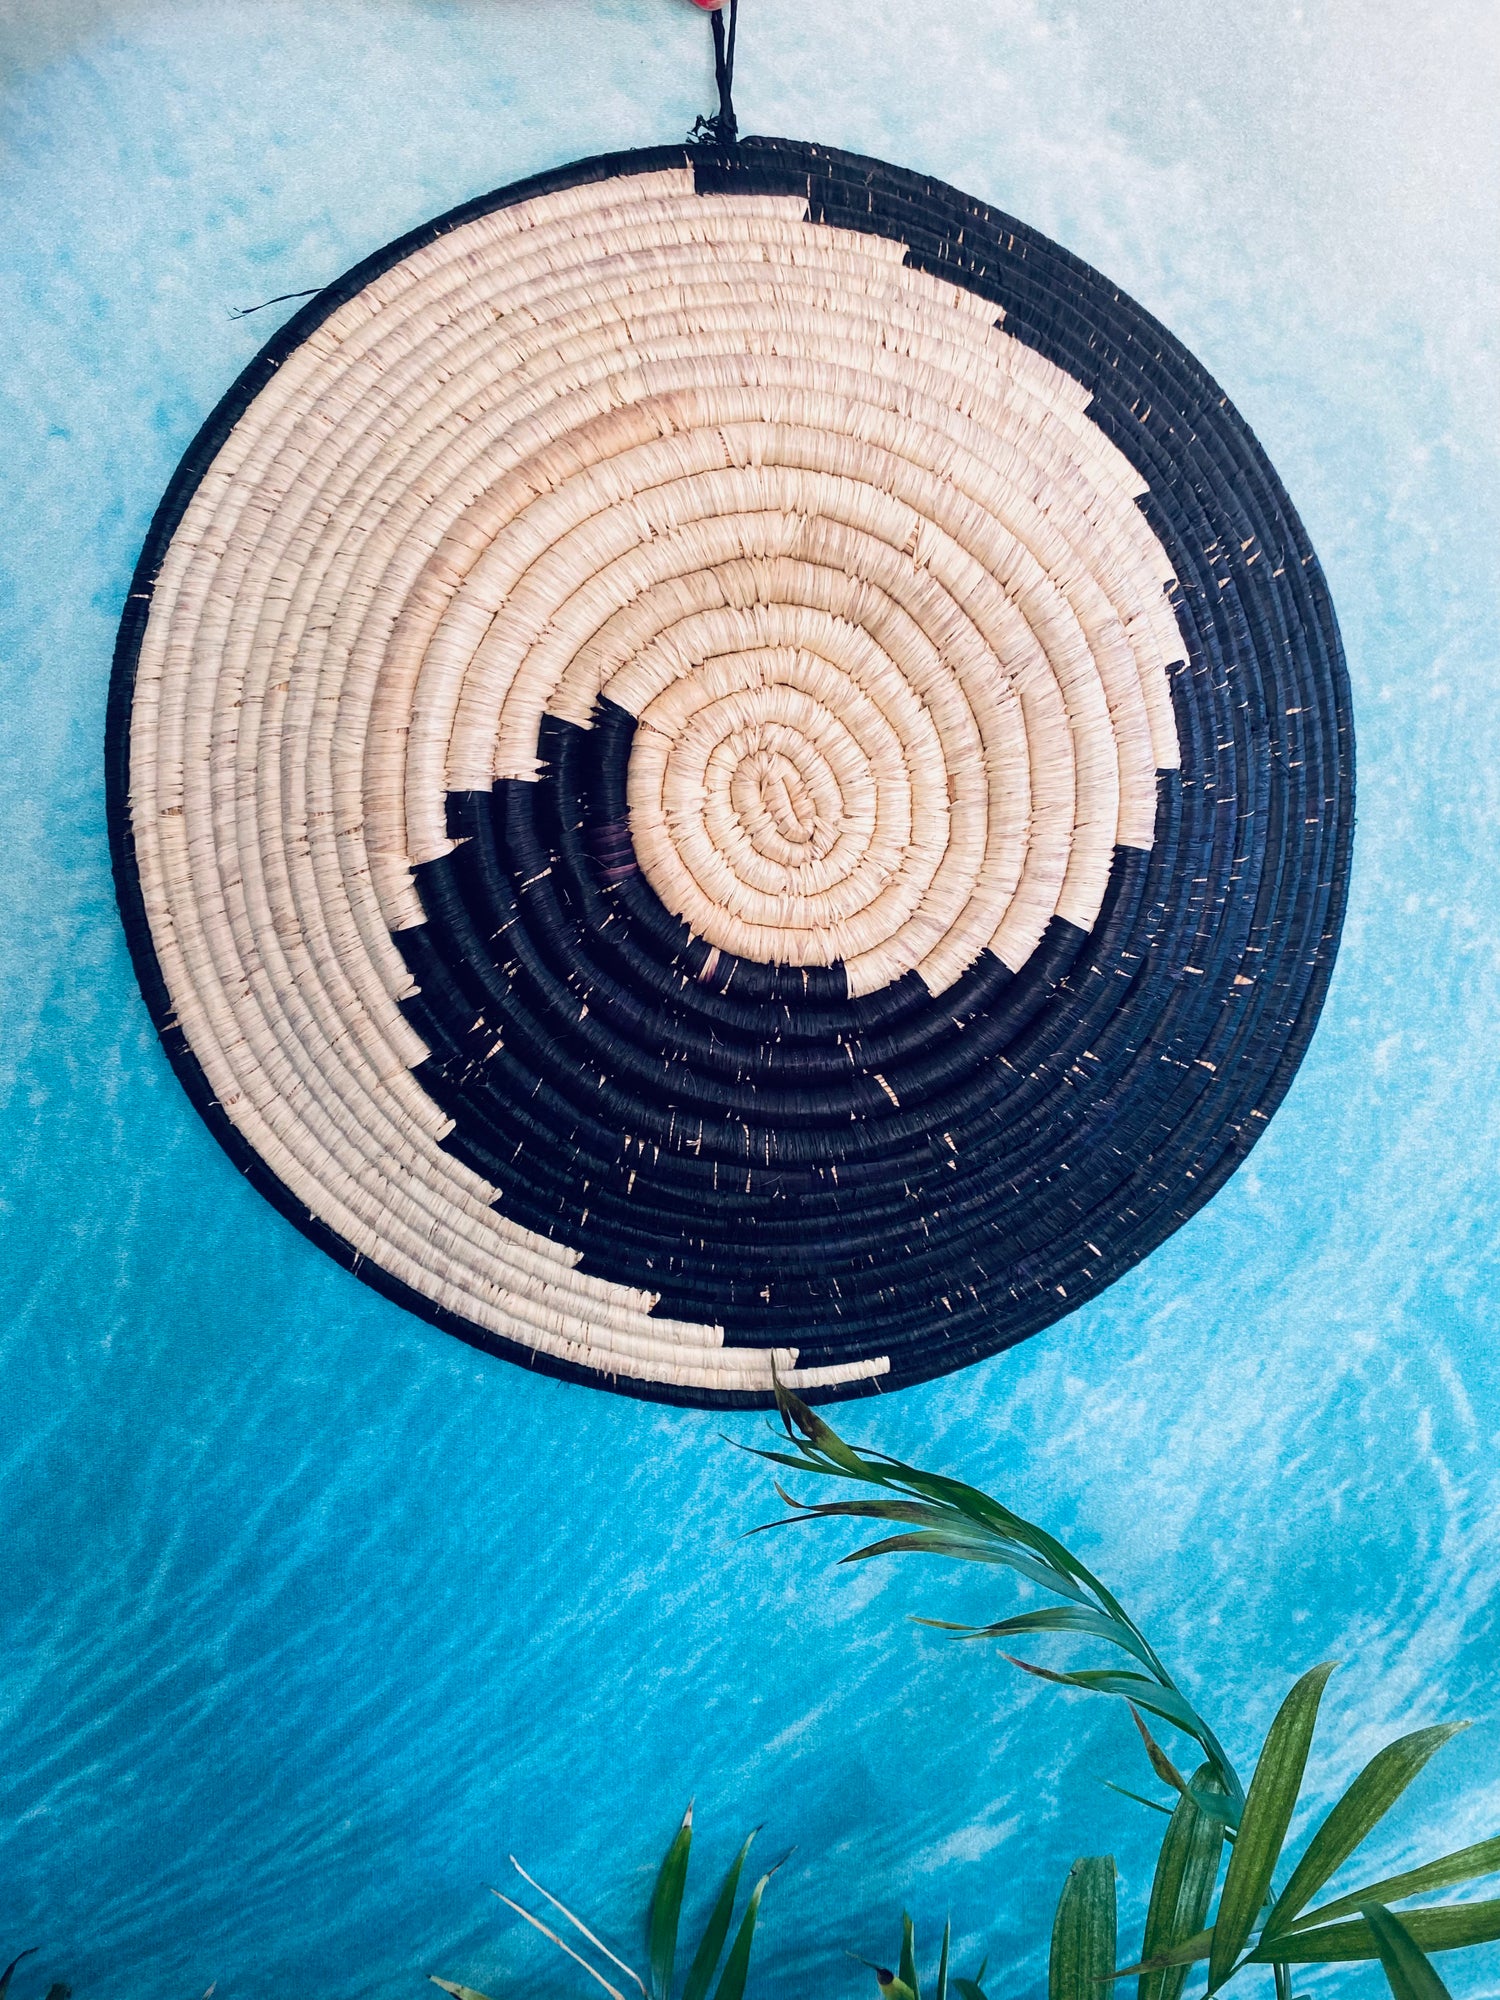 African Woven Trade Basket - Moon Room Shop and Wellness